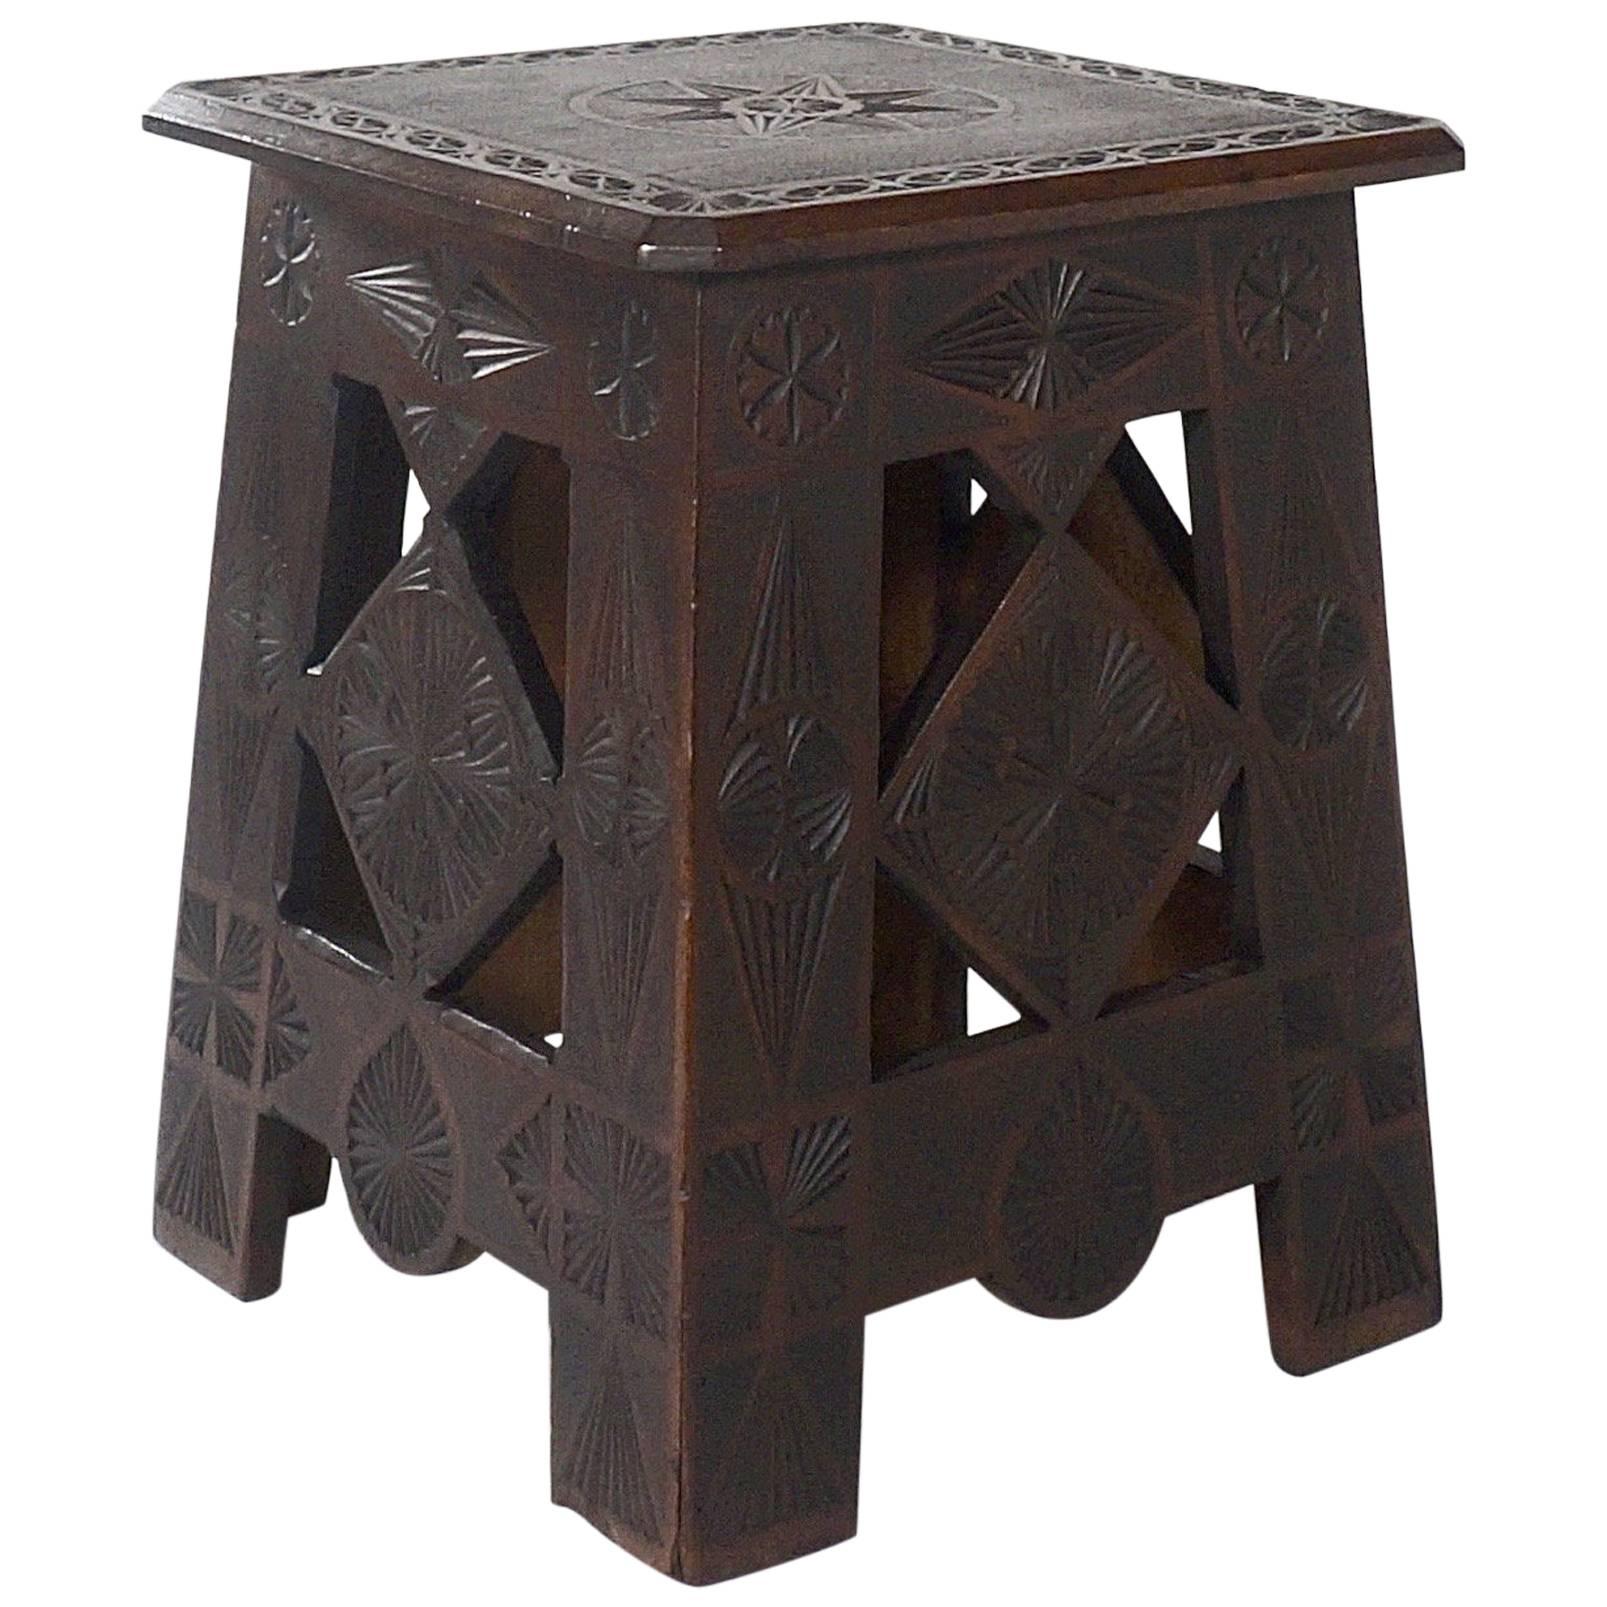 Russian Arts & Crafts Square Chip-Carved Pine Occasional Table